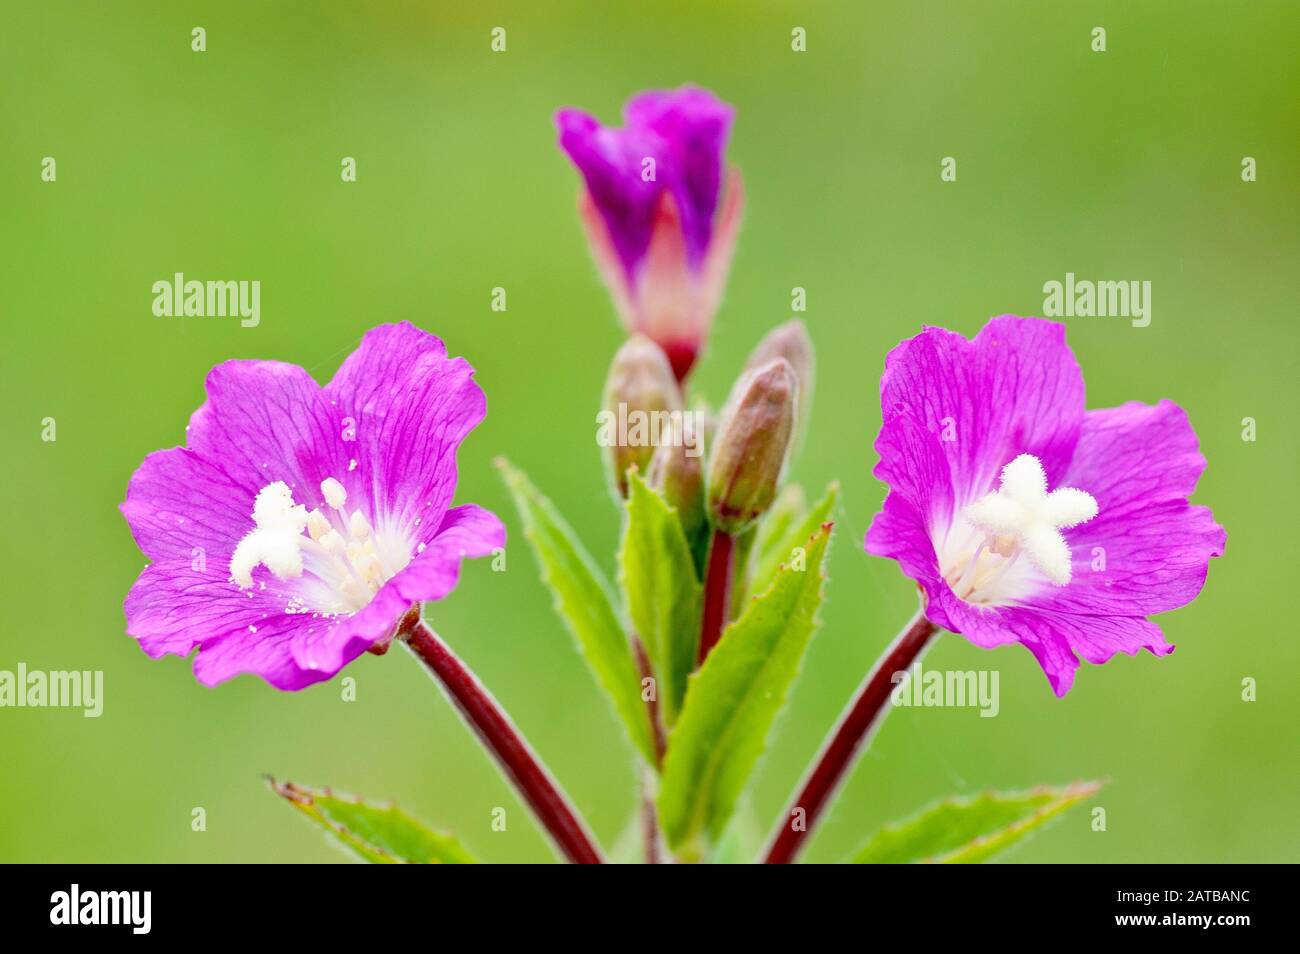 Great Willowherb (epilobium hirsutum), also known as Codlins and Cream, close up showing two flowers with buds. Stock Photo